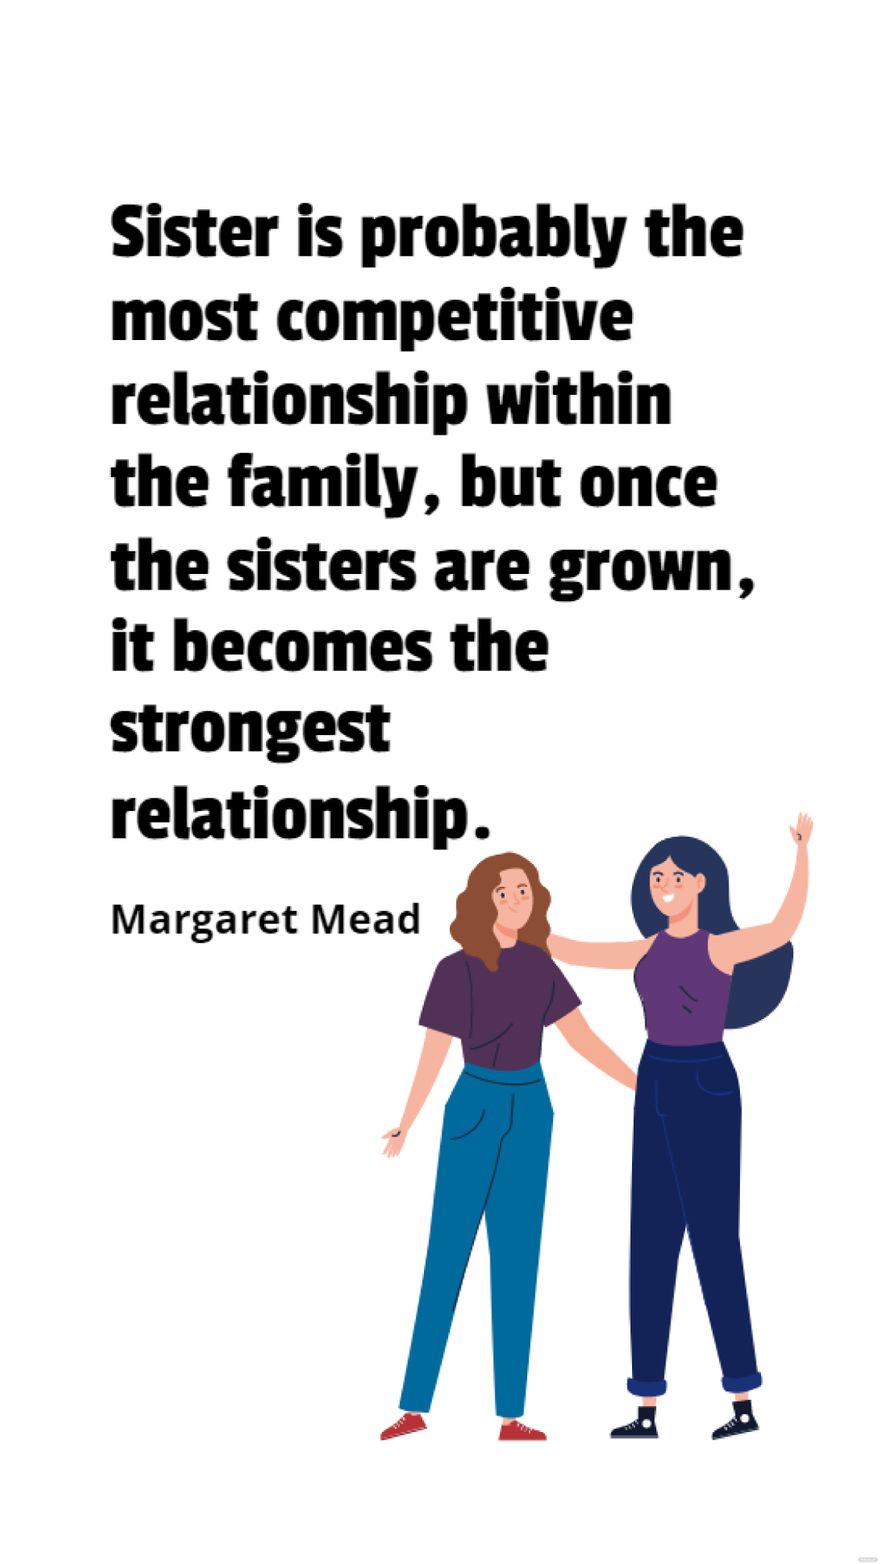 Margaret Mead - Sister is probably the most competitive relationship within the family, but once the sisters are grown, it becomes the strongest relationship.